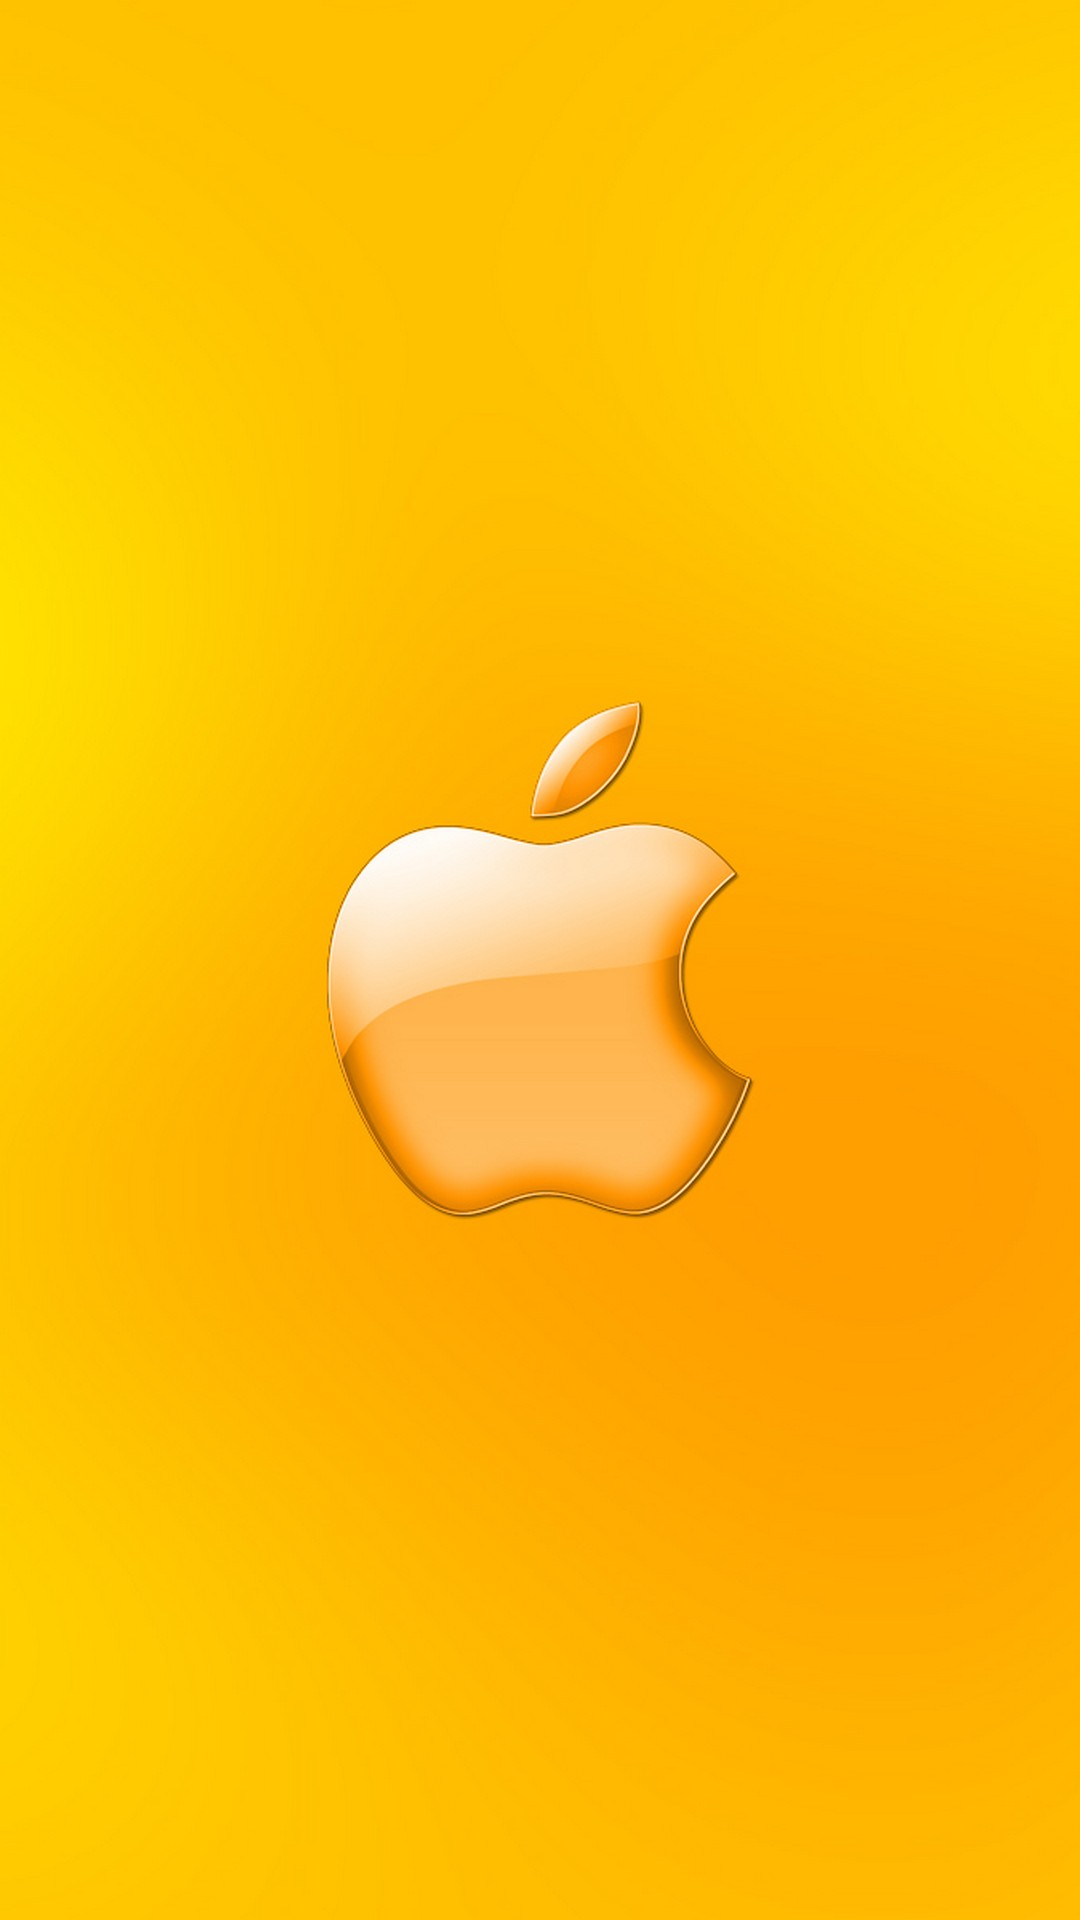 Apple Gold Logo For Android Wallpaper With Hd Resolution - 1080x1920  Wallpaper 